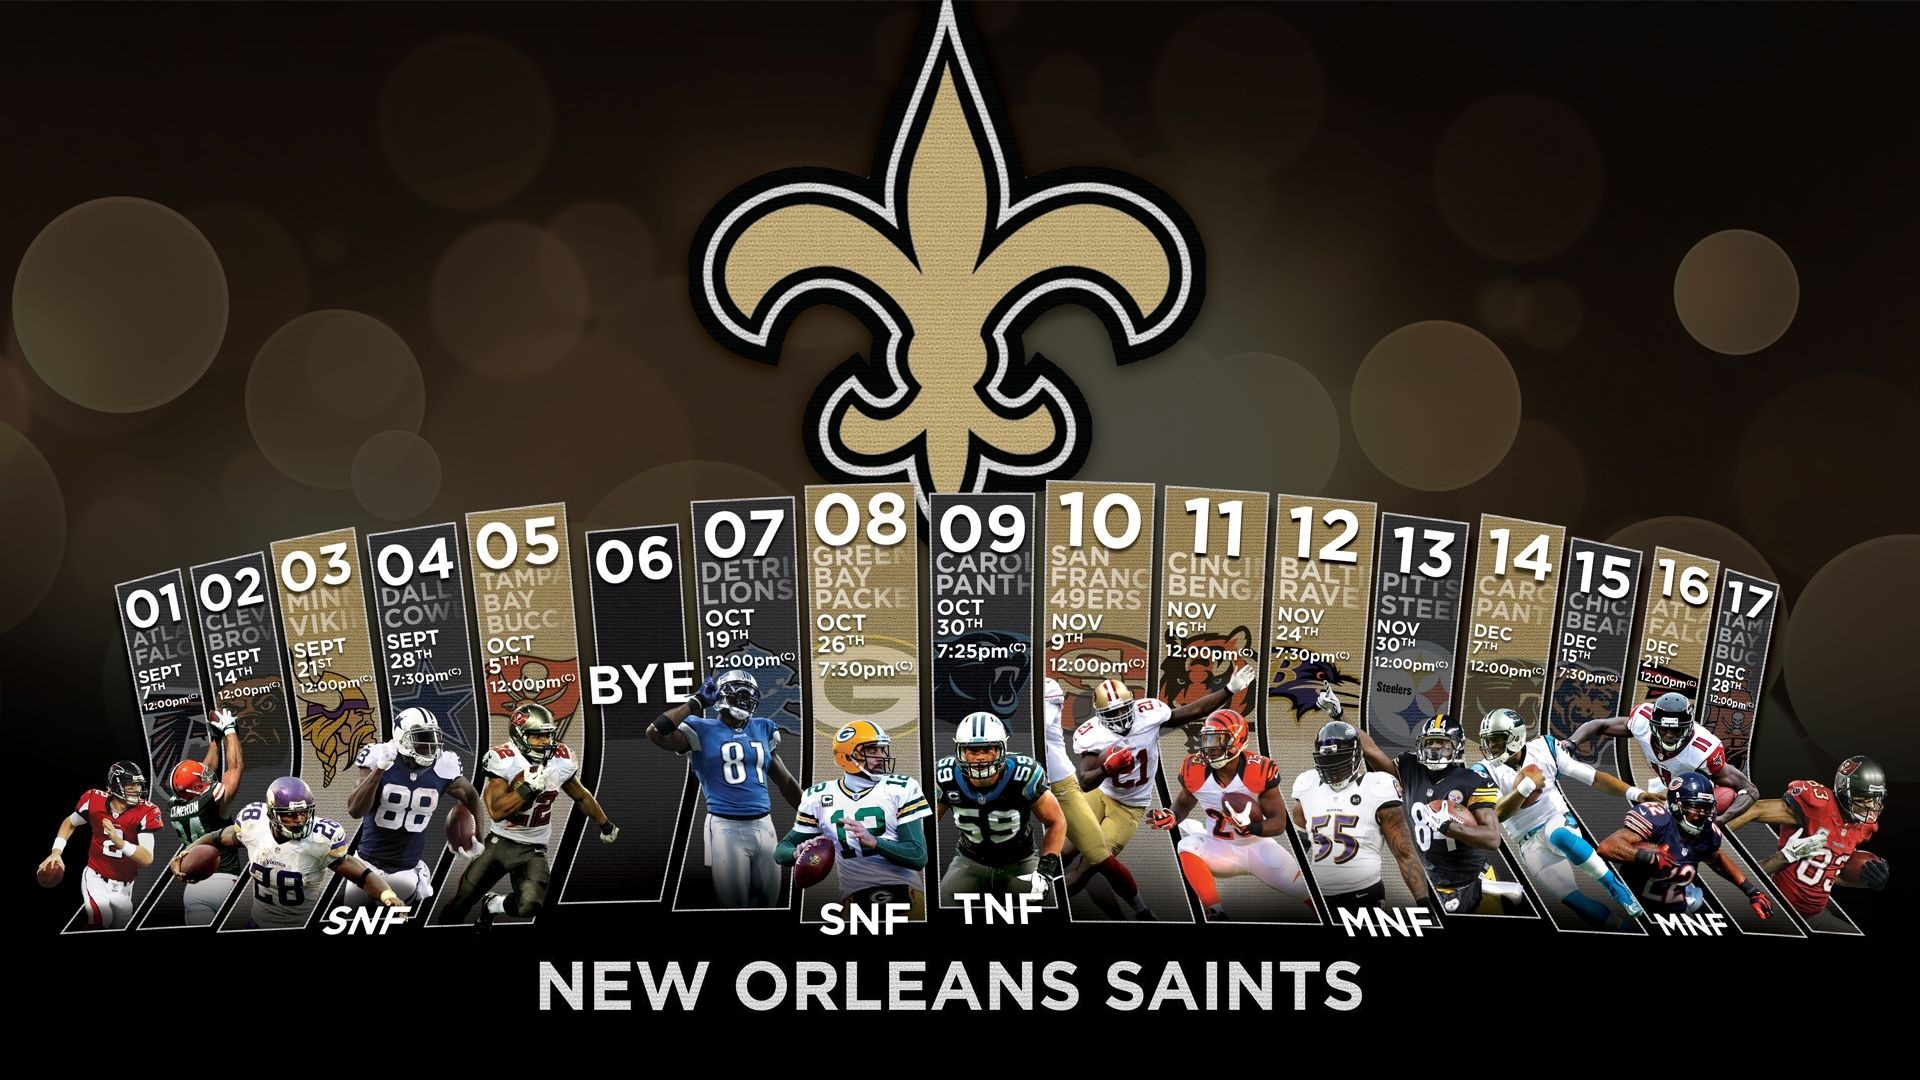 HD Desktop Wallpaper New Orleans Saints NFL with resolution 1920x1080 pixel. You can make this wallpaper for your Mac or Windows Desktop Background, iPhone, Android or Tablet and another Smartphone device